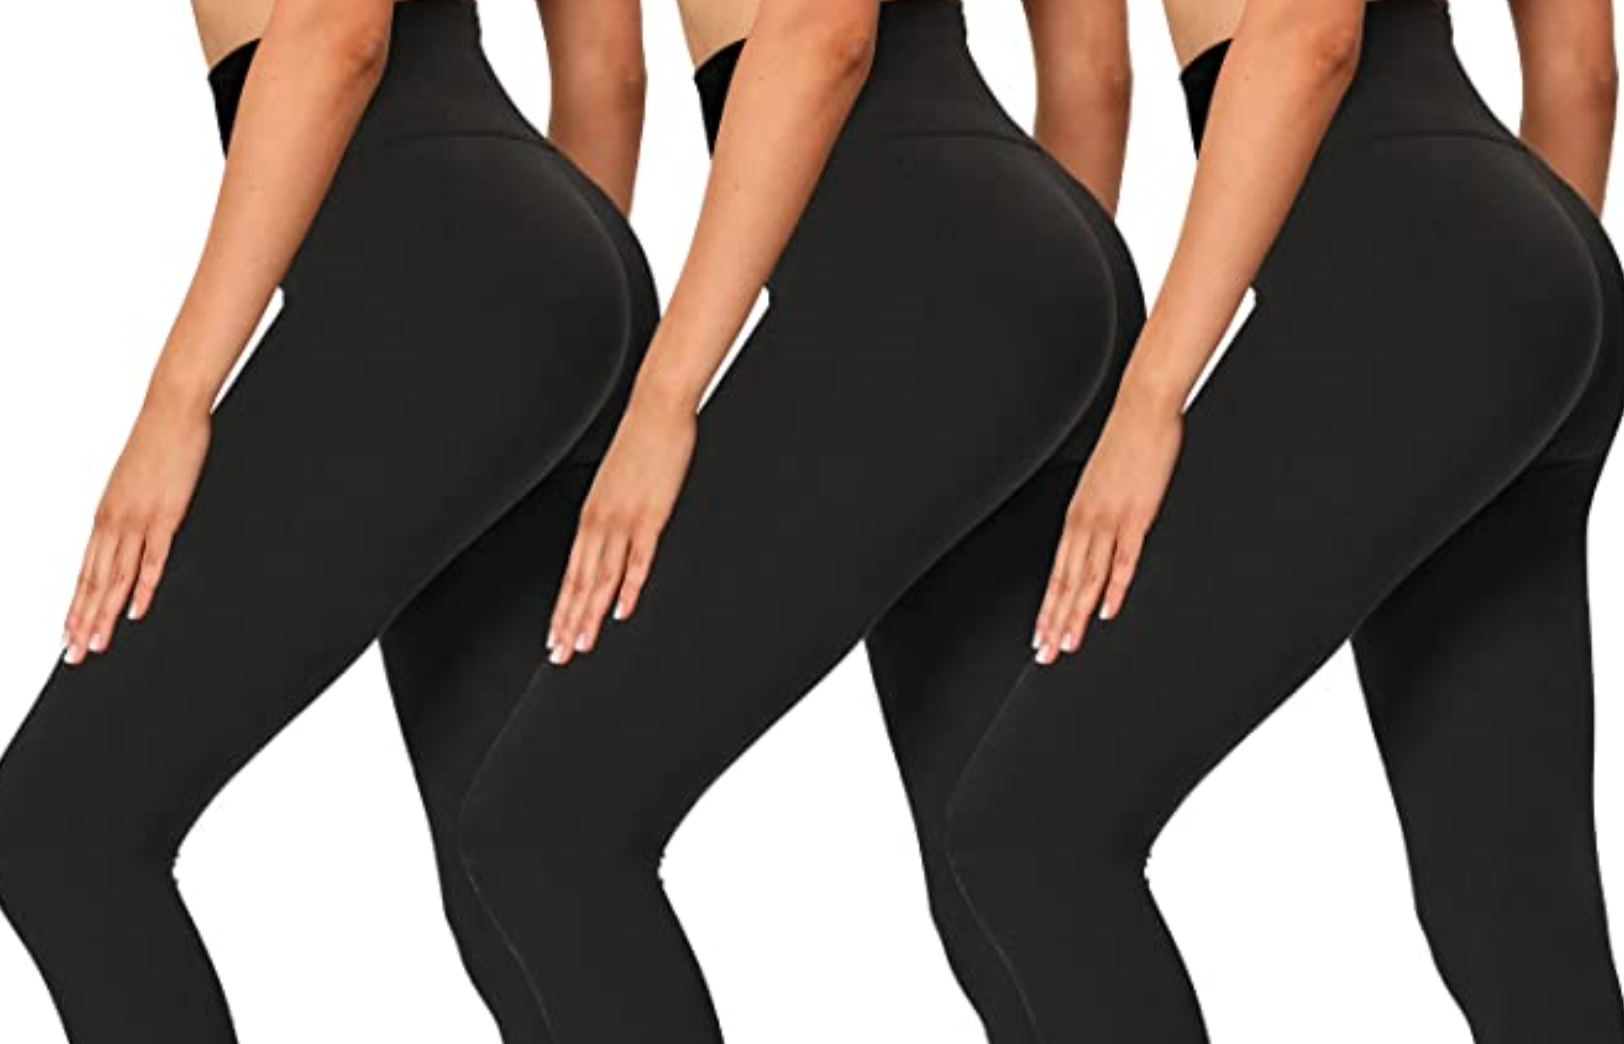 These tummy-control leggings are on sale for $8.33 each